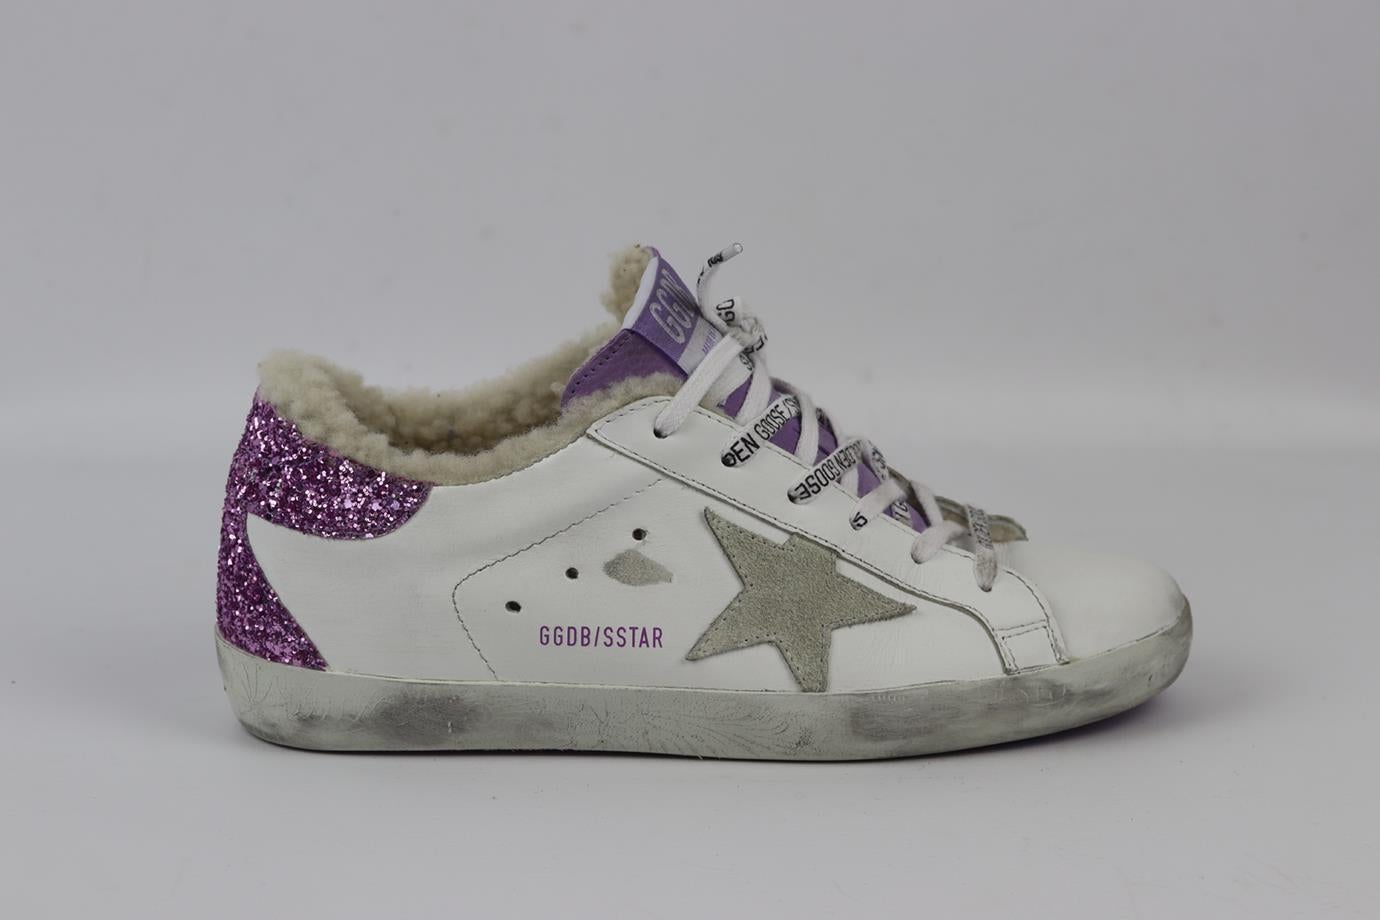 Golden Goose Deluxe Brand Superstar shearling lined leather sneakers. Purple, white and ecru. Lace up fastening at front. Does not come with dustbag or box. Size: EU 38 (UK 5, US 8). Insole: 9.8 in. Heel Height: 1.2 in. Very good condition - Worn